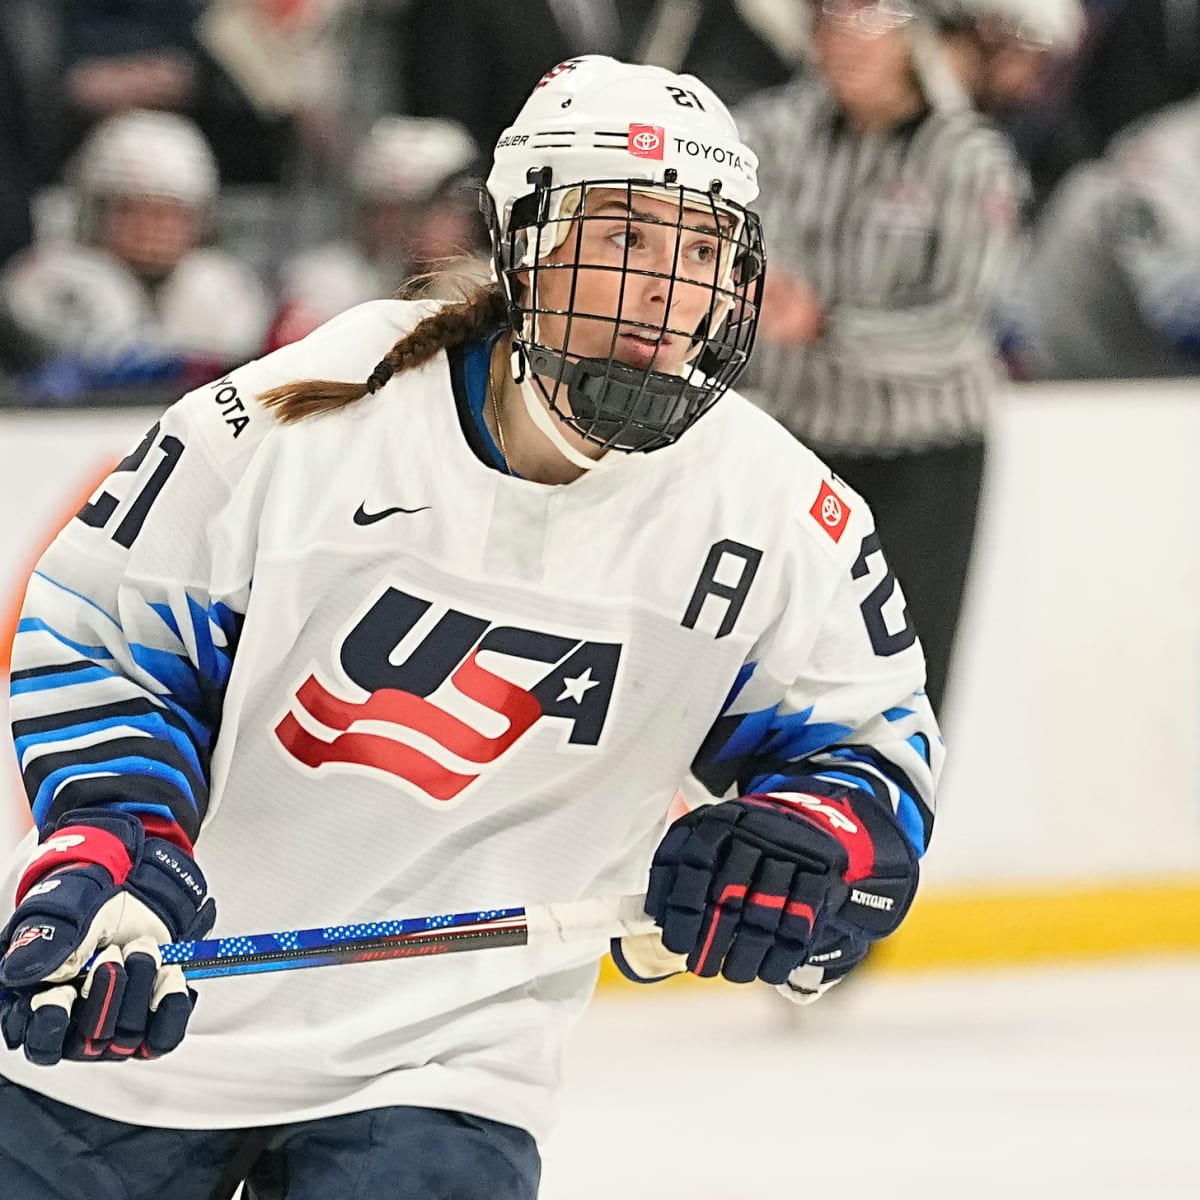 Players with New England connections in the women's hockey worlds